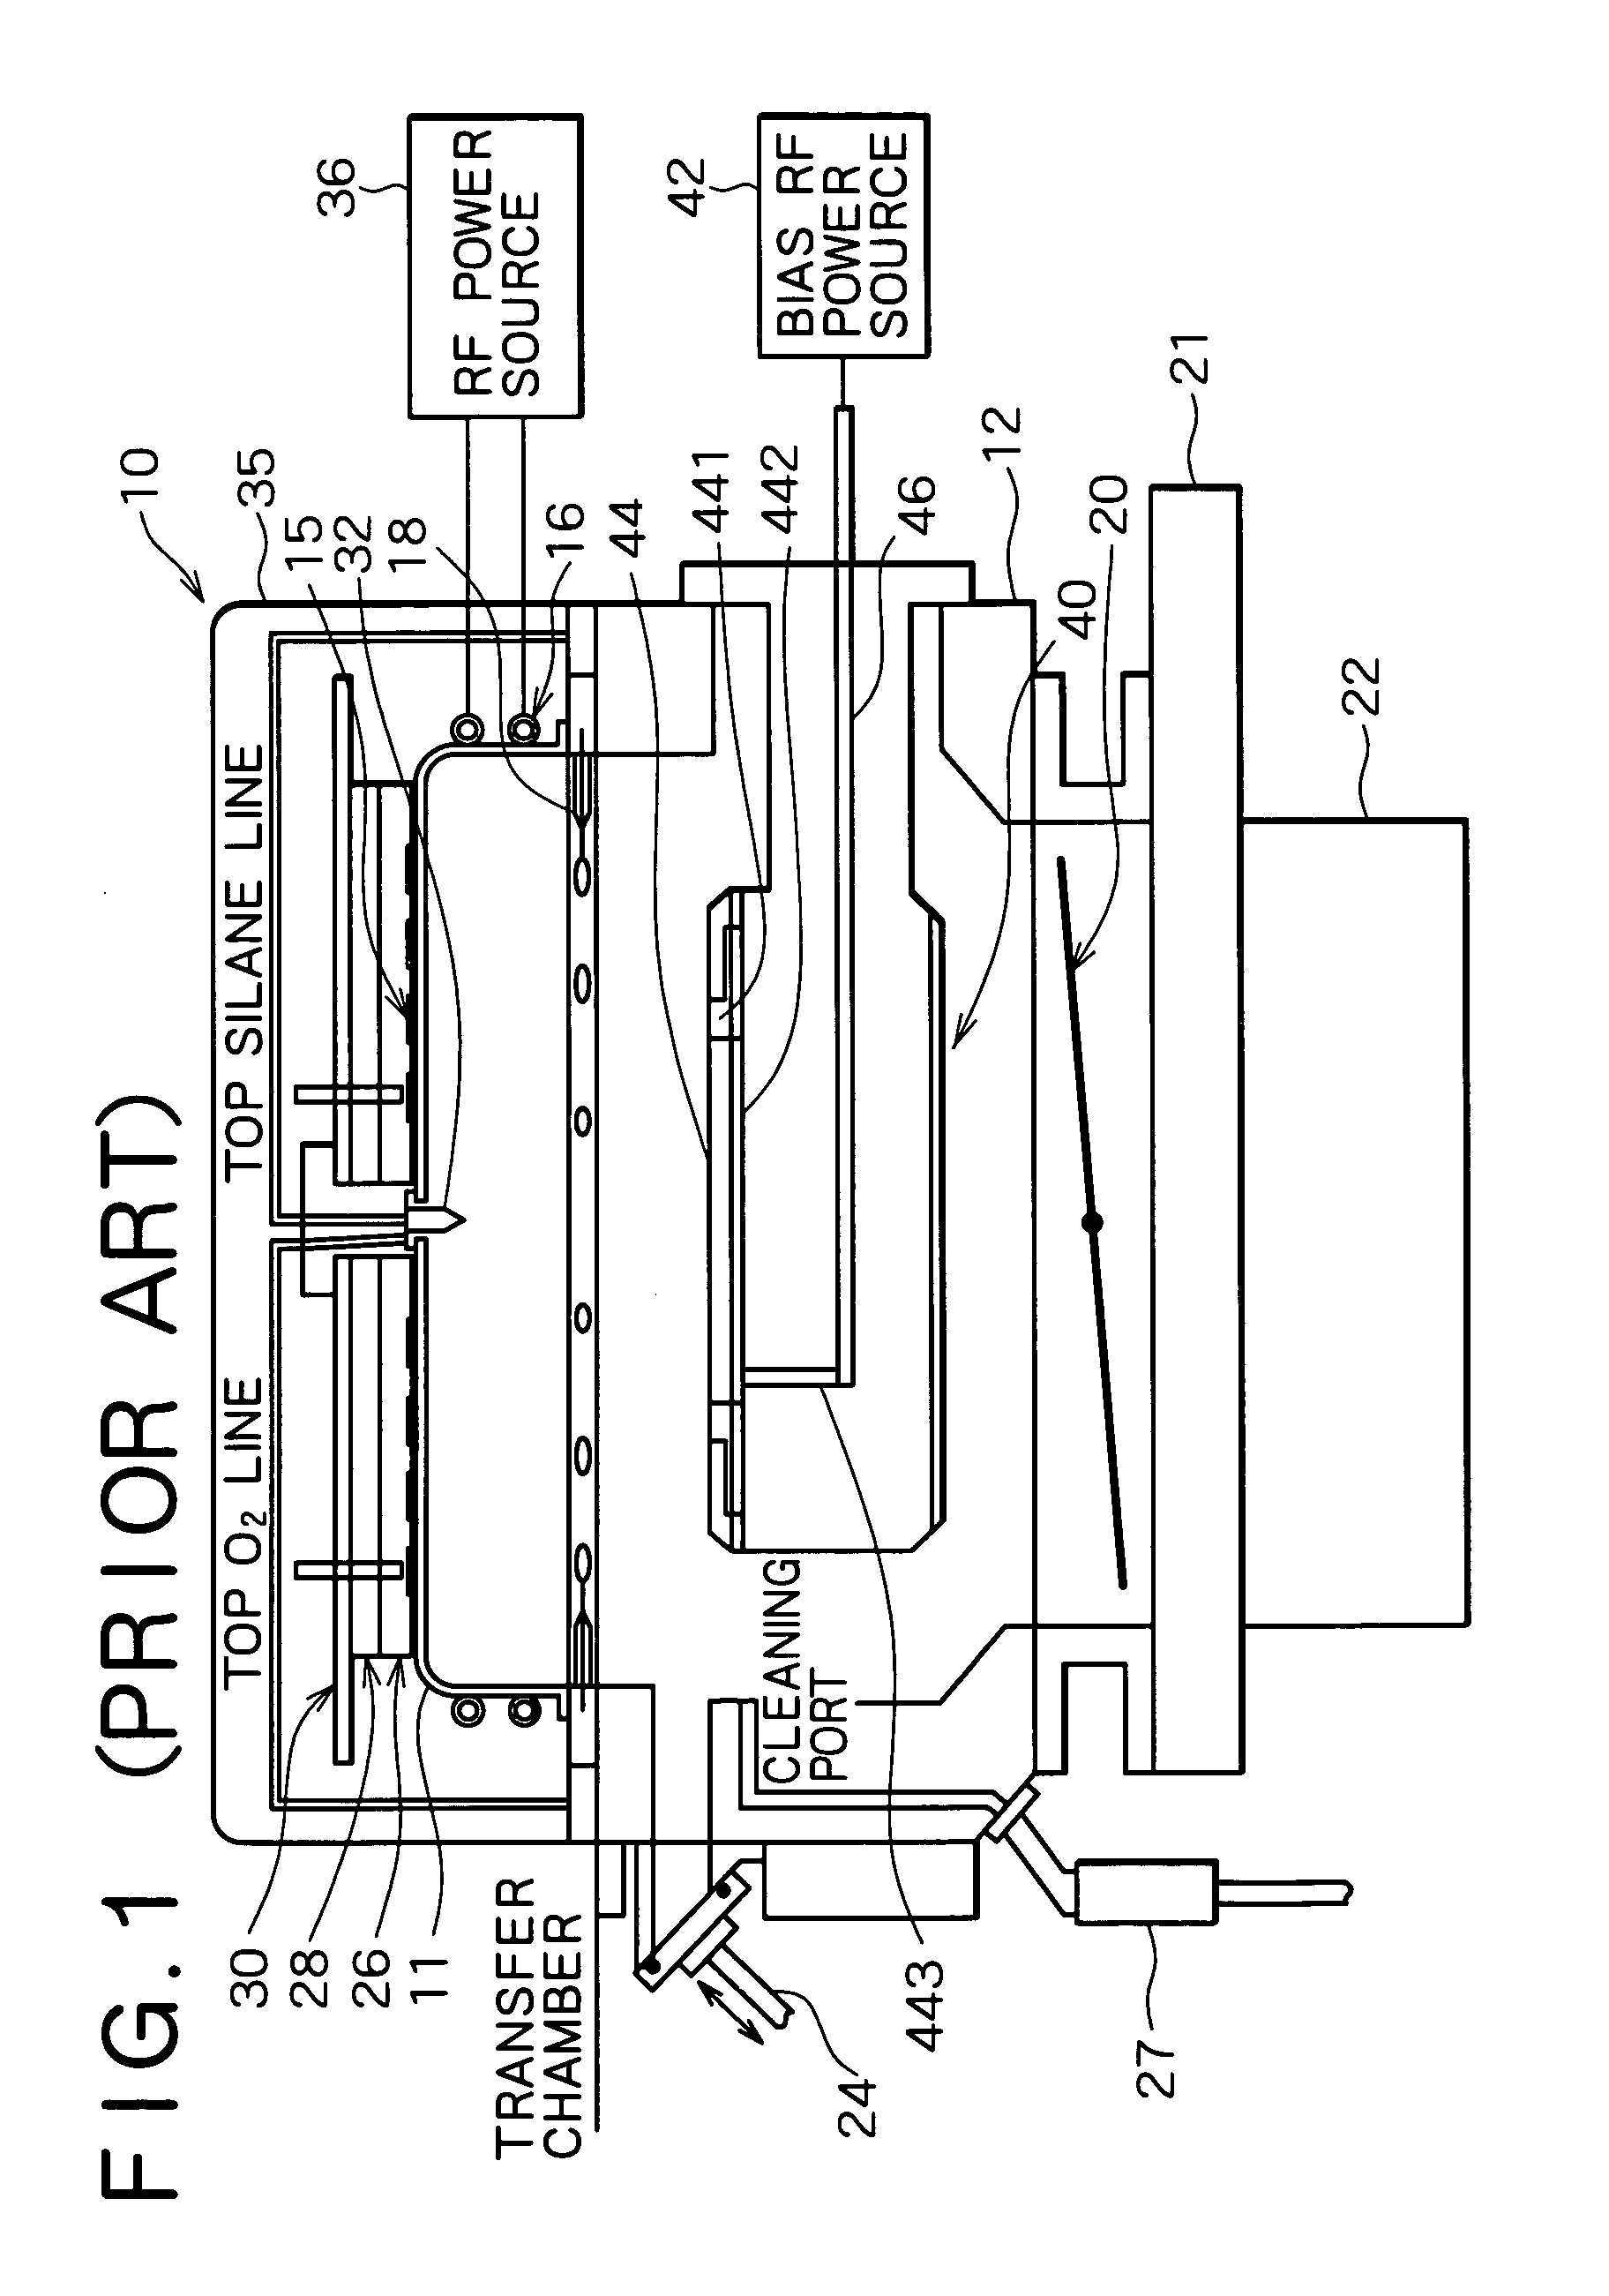 Plasma processing apparatus, semiconductor manufacturing apparatus and electrostatic chucking unit used thereof